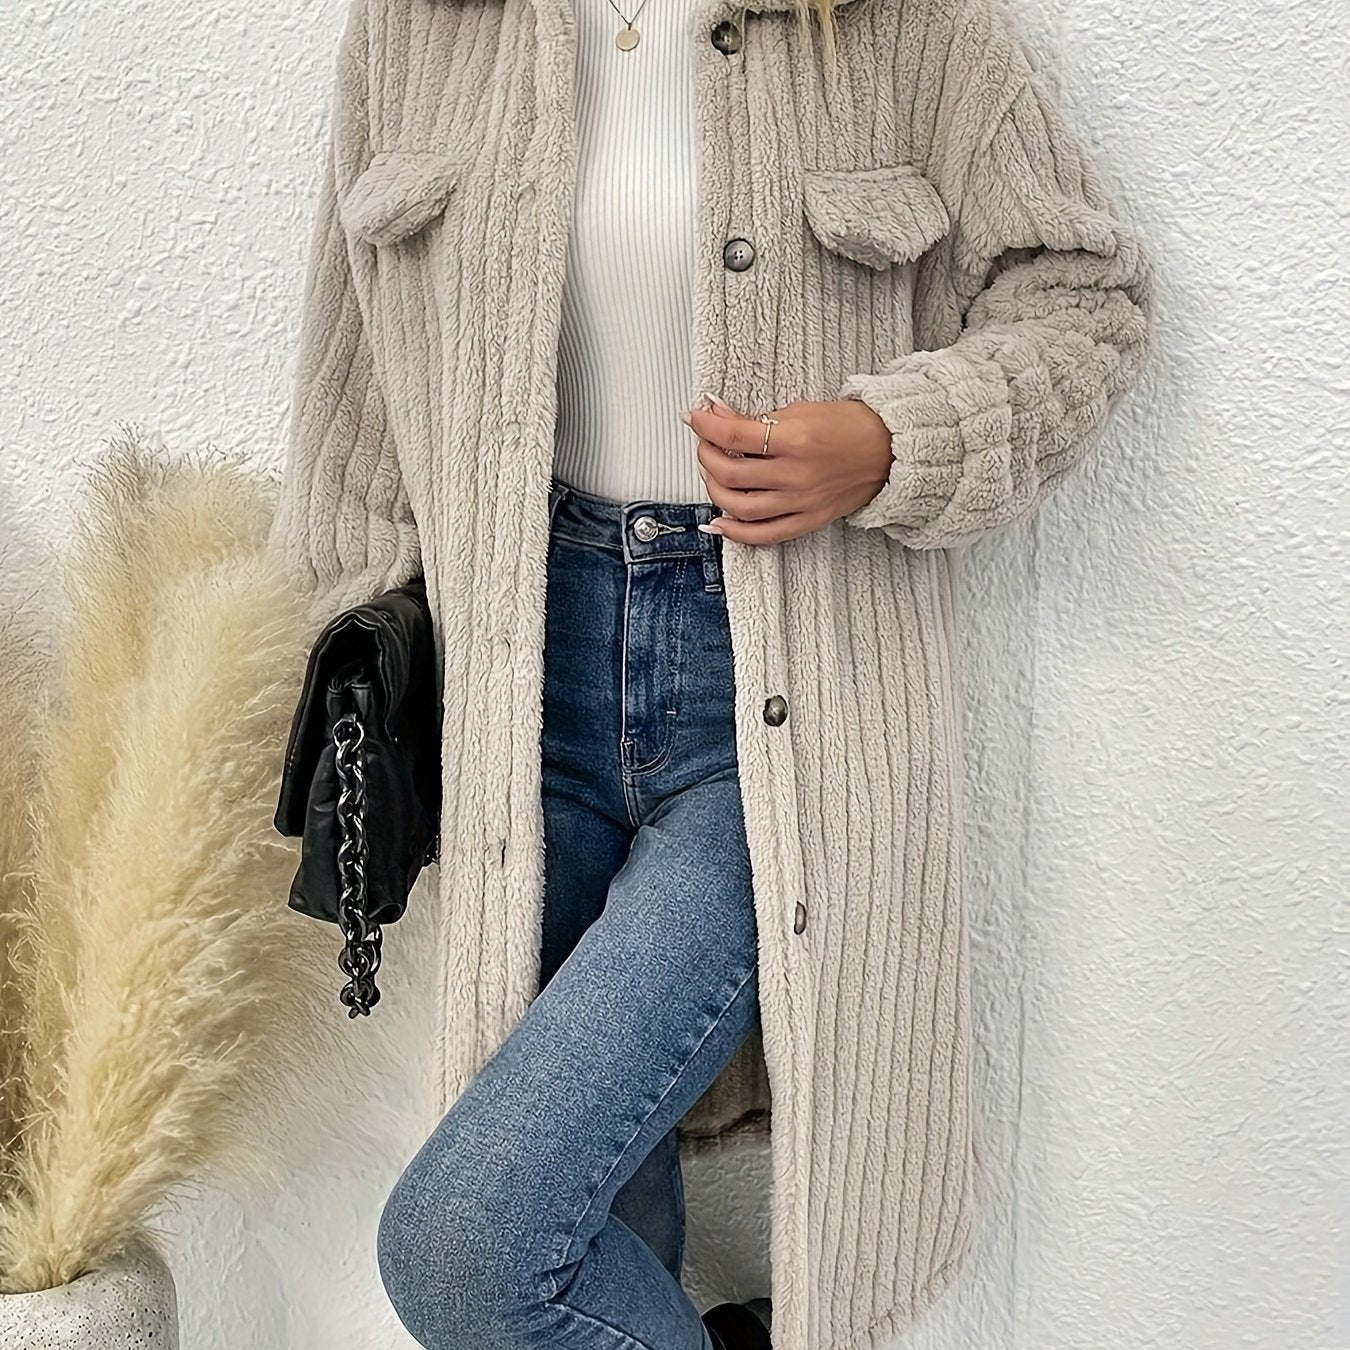 vlovelaw  Button Front Lapel Plush Coat, Long Sleeve Textured Outwear For Winter, Women's Clothing